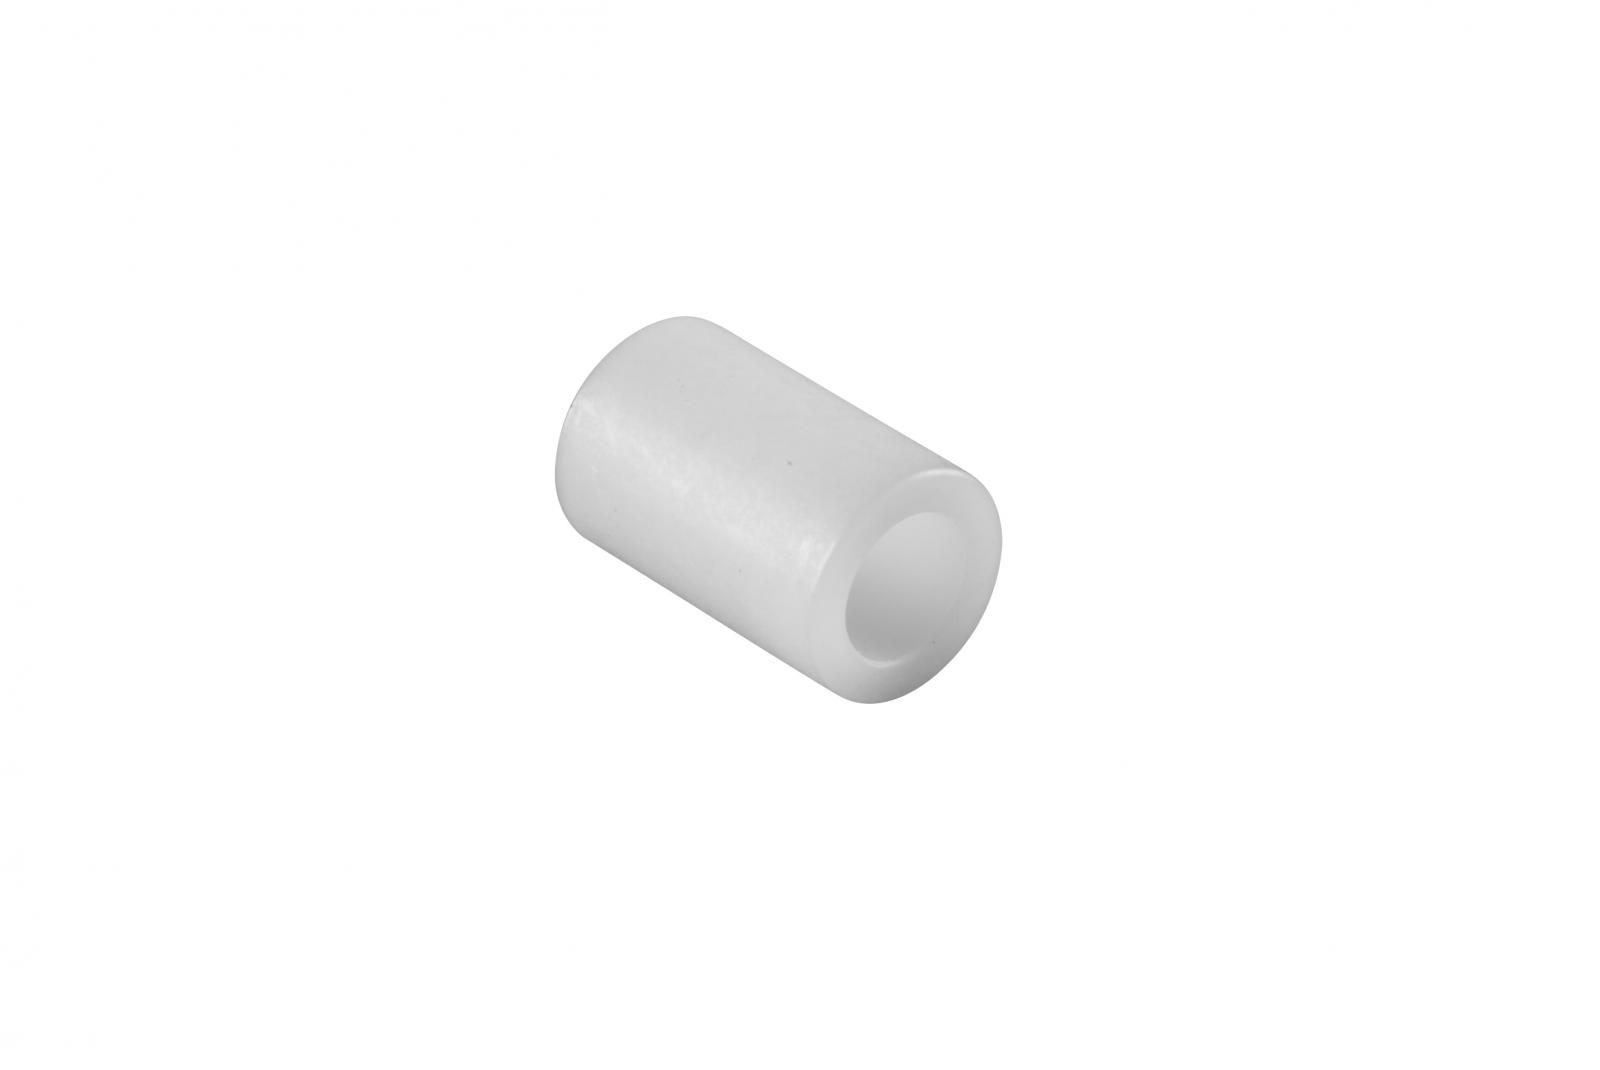 Drywall Master Guide Roller. Part number 050226